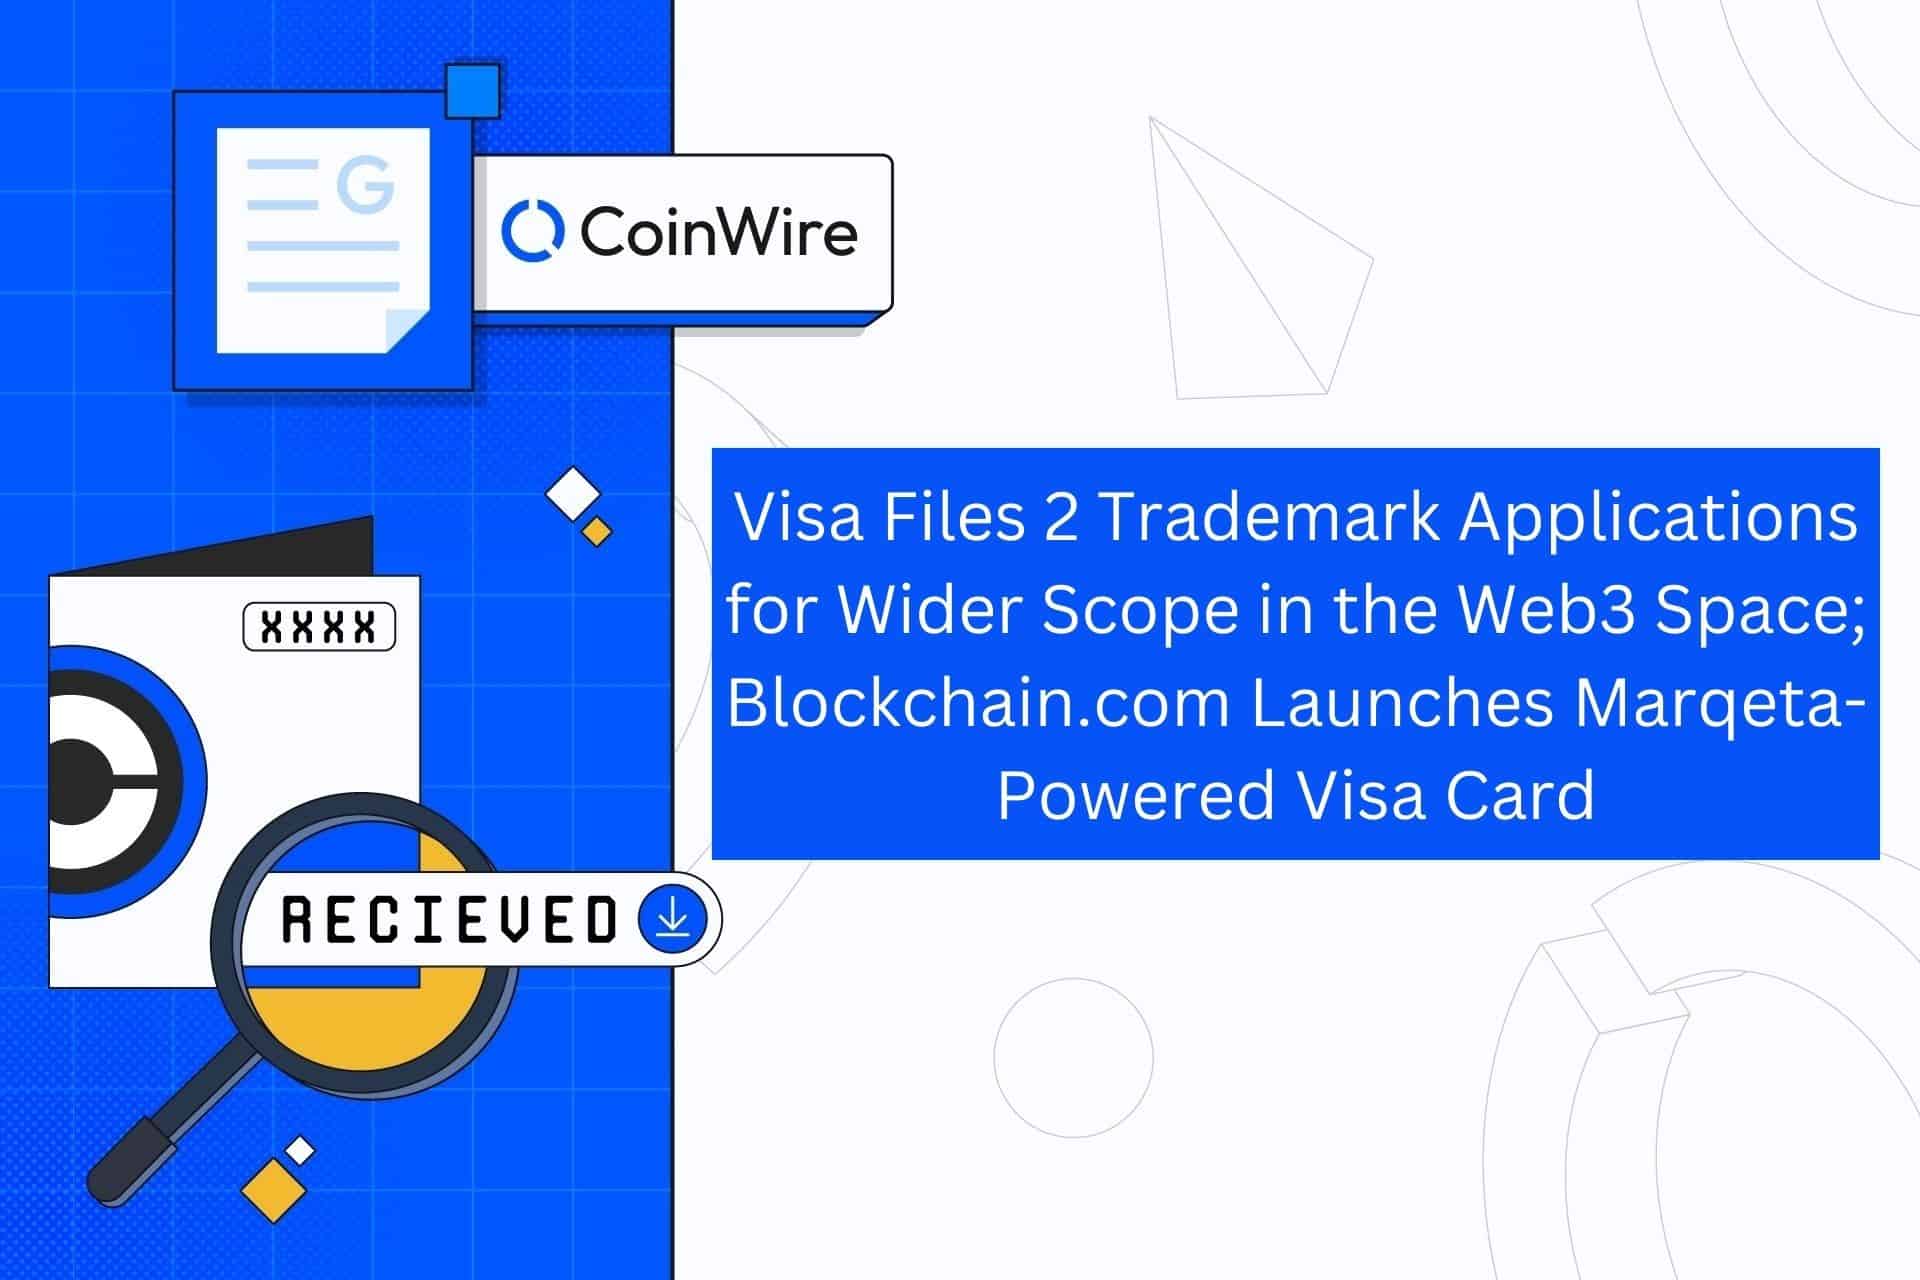 Visa Files 2 Trademark Applications For Wider Scope In The Web3 Space; Blockchain.com Launches Marqeta-Powered Visa Card